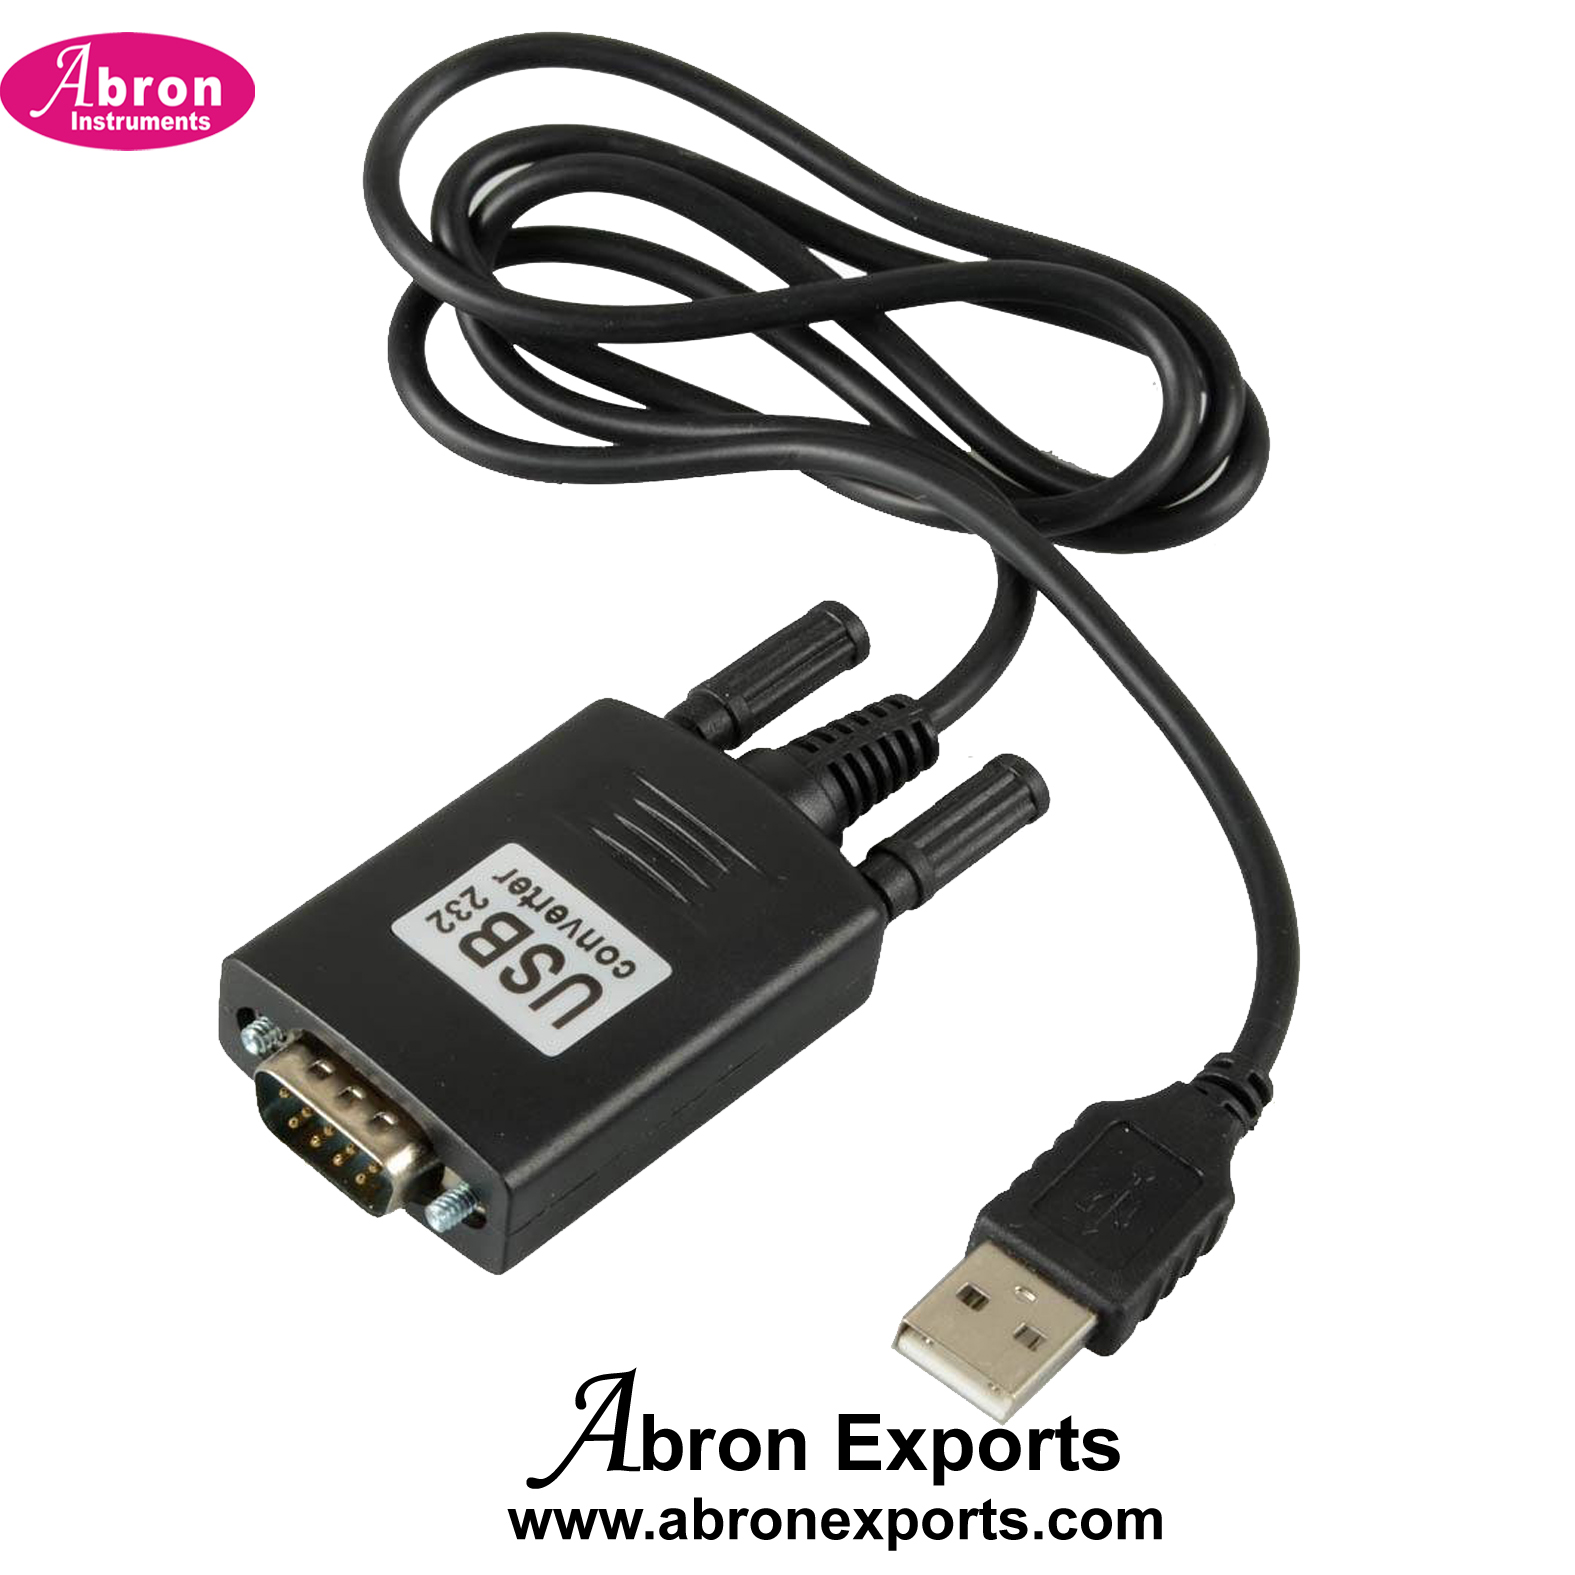 Electronic Spare Cable RS-232 Serial Converter Cable USB to Serial (9-Pin) DB-9 RS-232 Converter Cable Abron AE-1224DC 